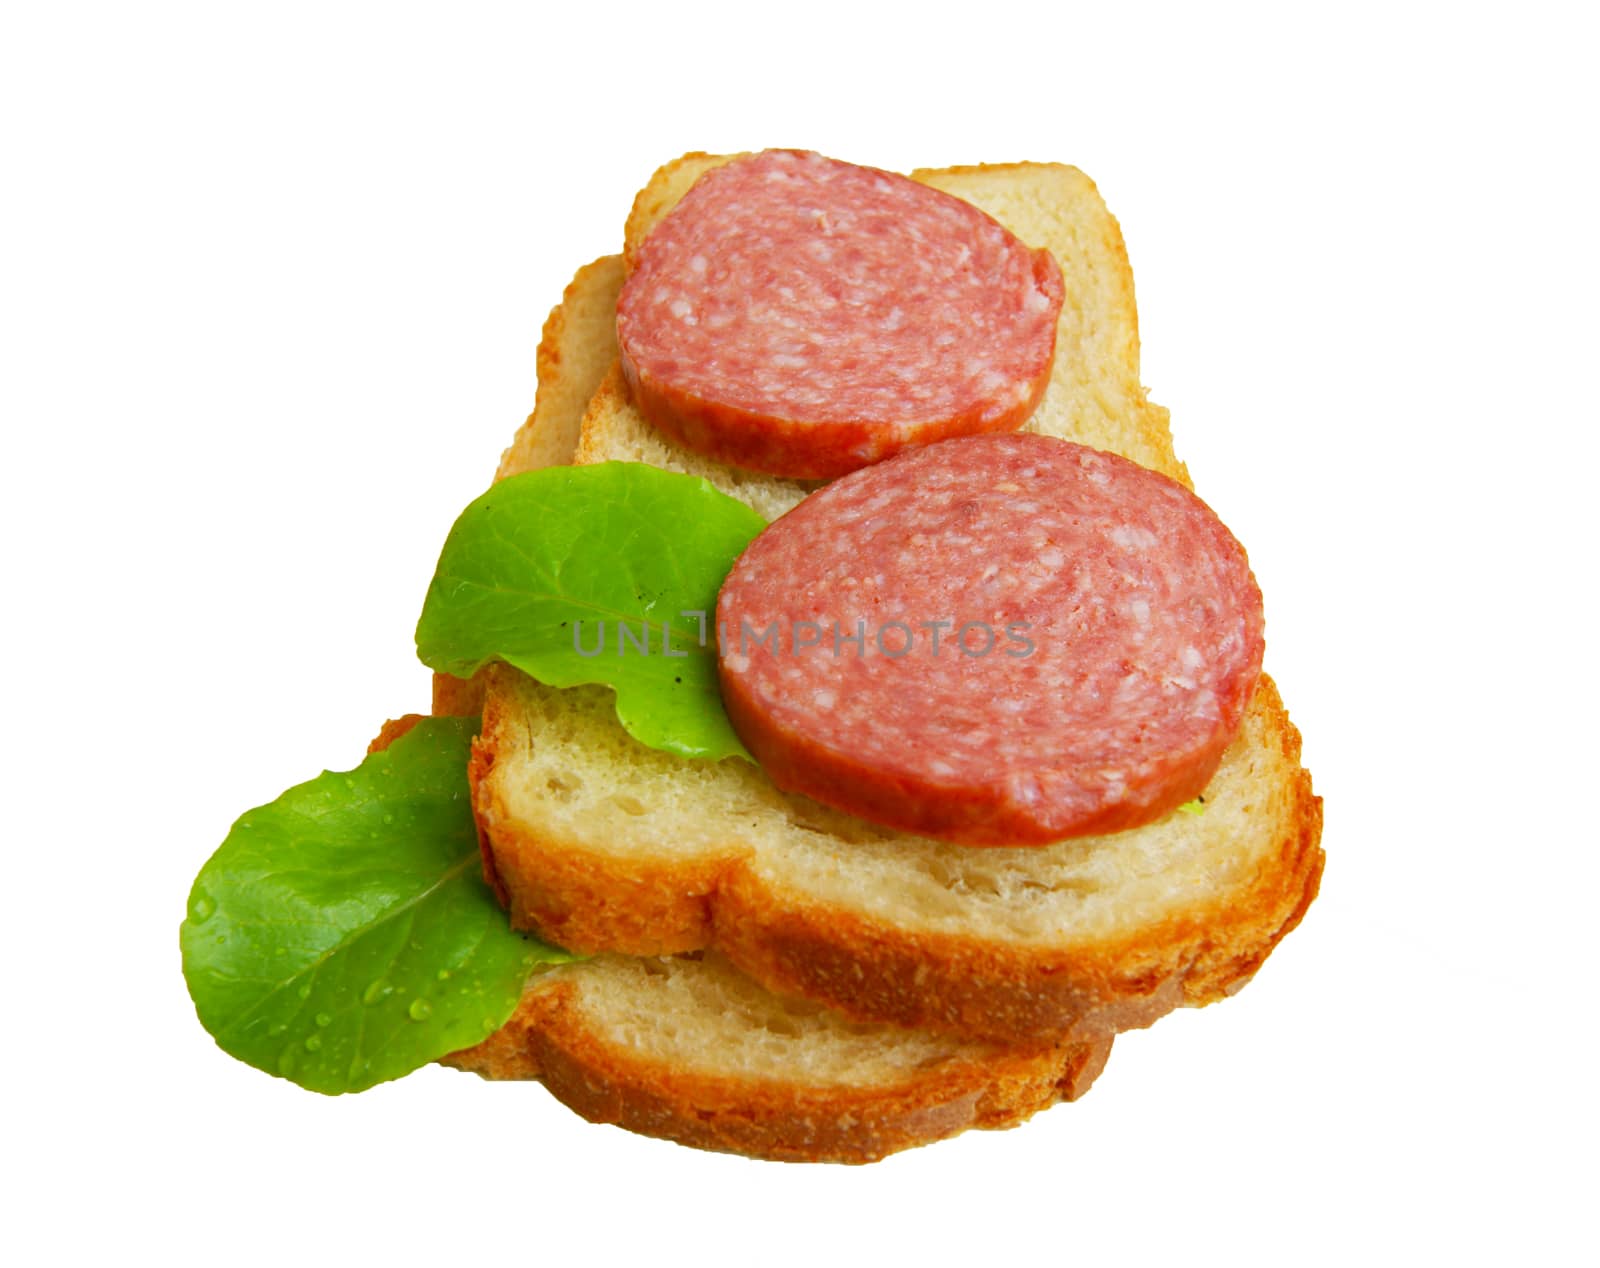 Products bread and sausage on white background is insulated